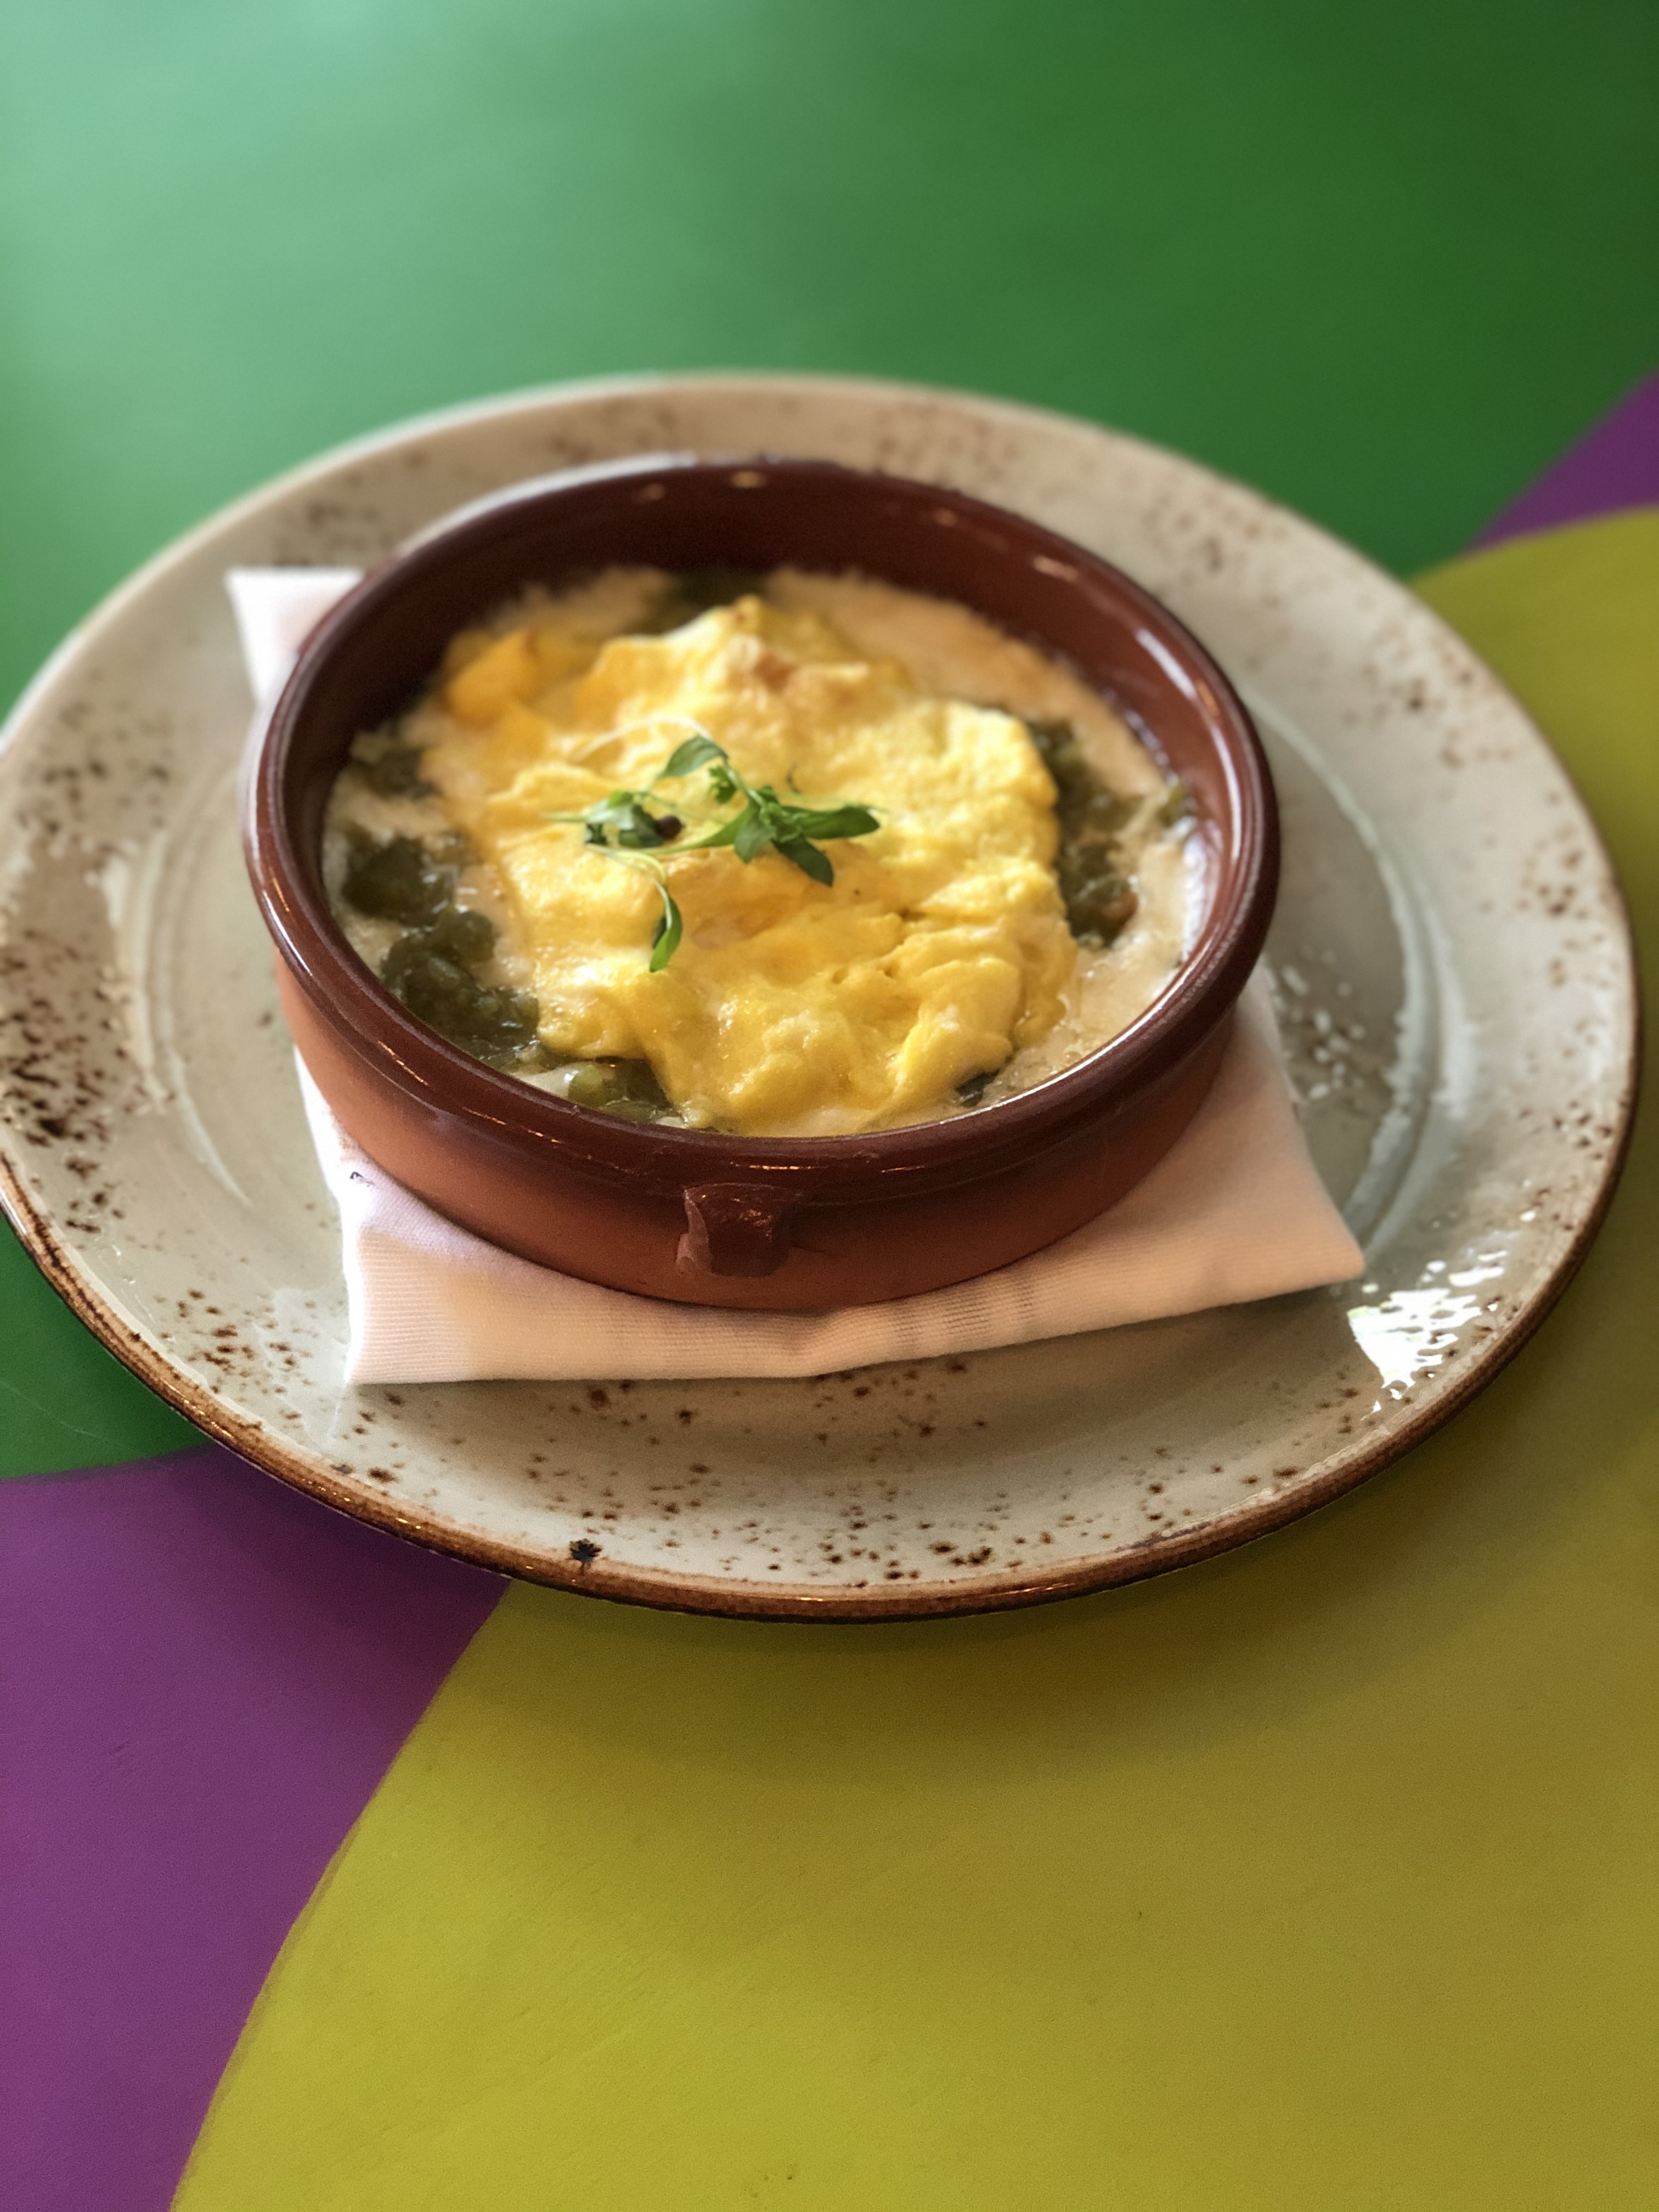 The restaurant's popular queso fundido will get the brunch treatment at Coche Comedor. 